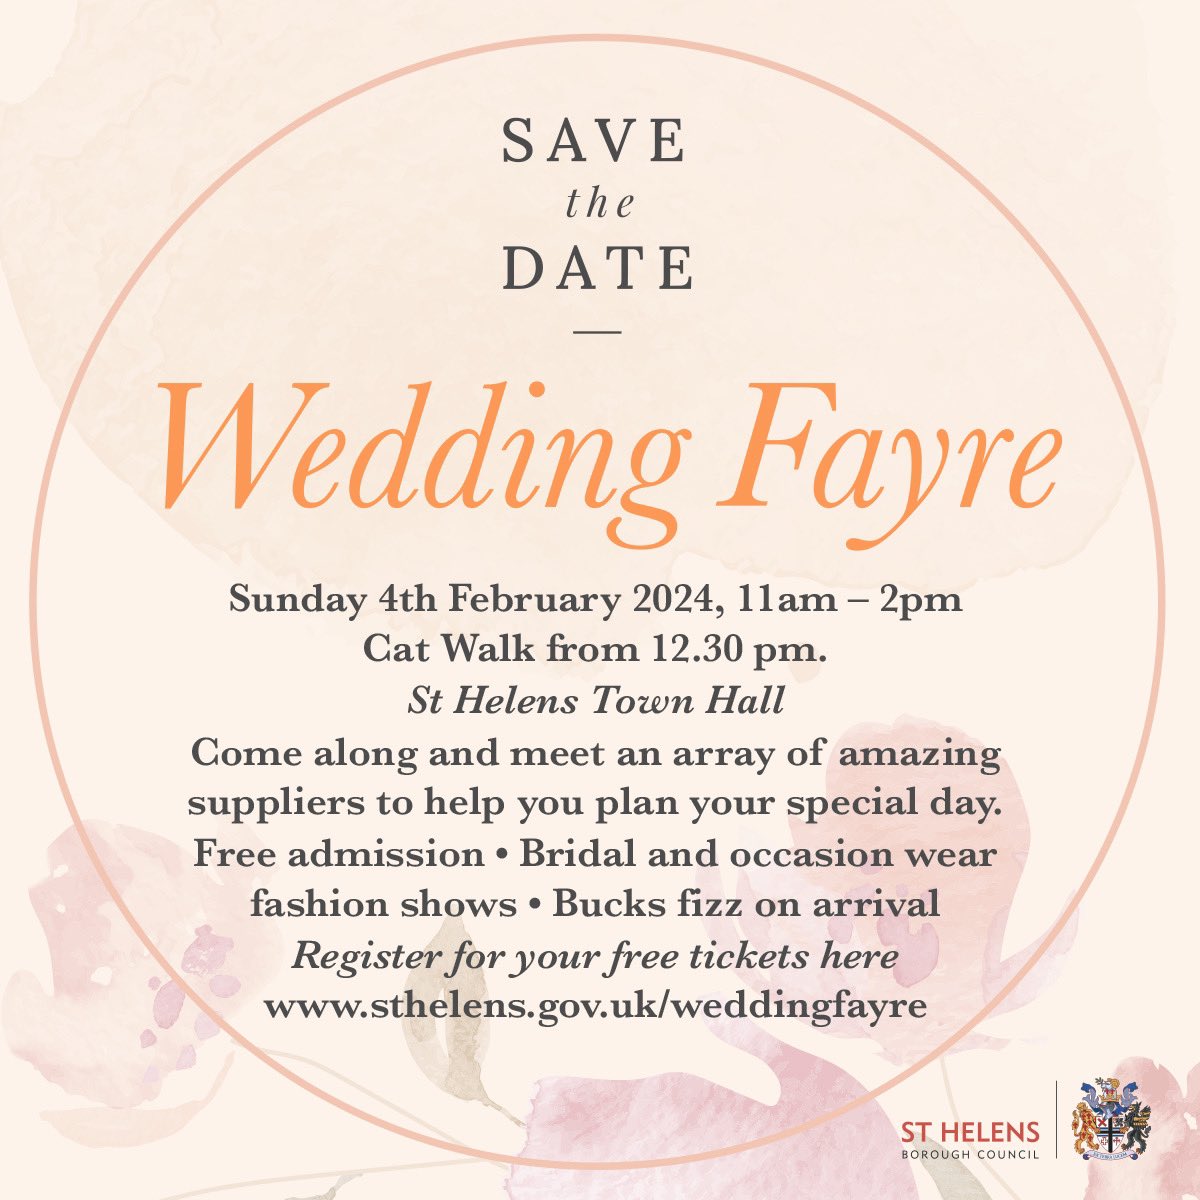 Calling all local #StHelens wedding supplier businesses please contact weddings@sthelens.gov.uk to register your interest in attending the below event #supportlocalbusiness ❤️